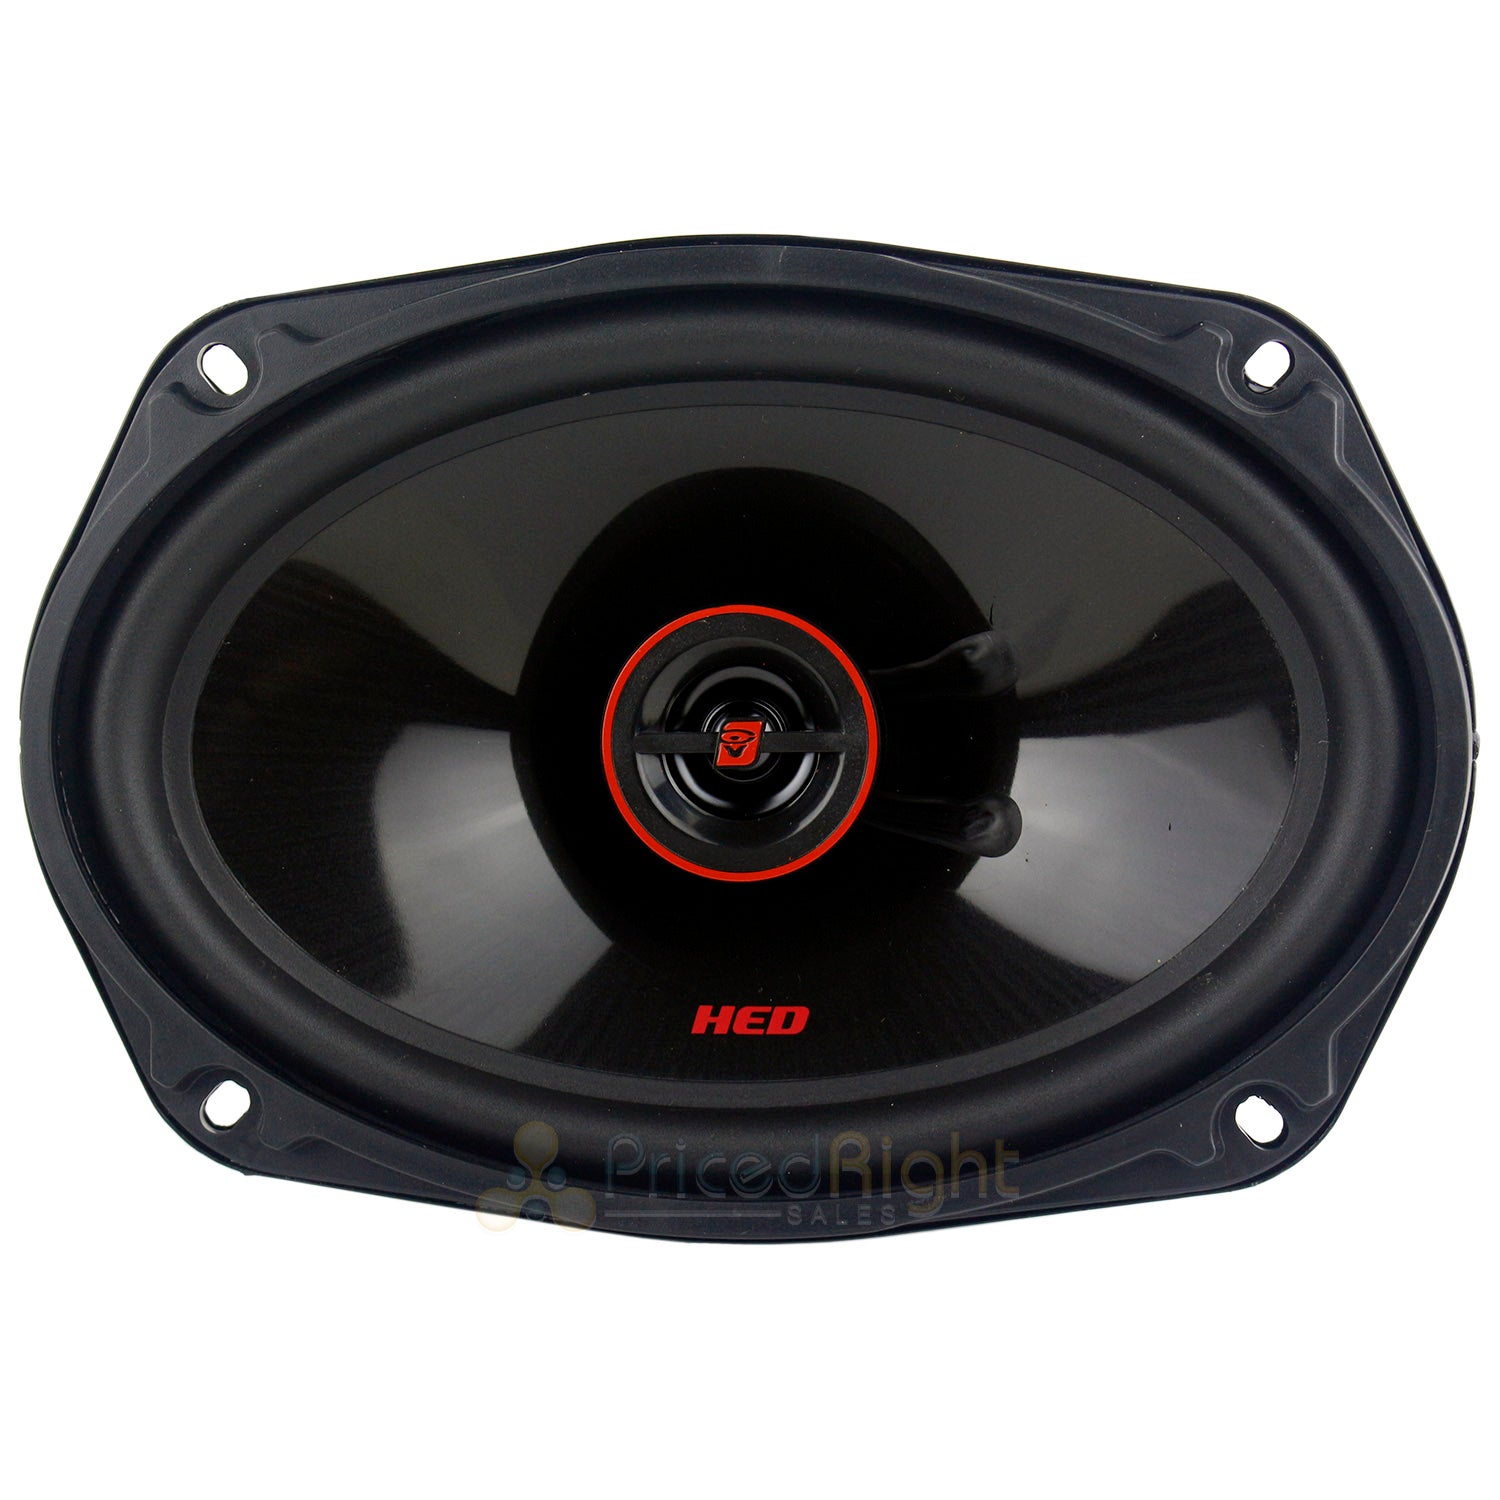 Cerwin Vega 6x9" 2-Way Coaxial Car Speakers with 4 Four Hole Box Enclosure H7692